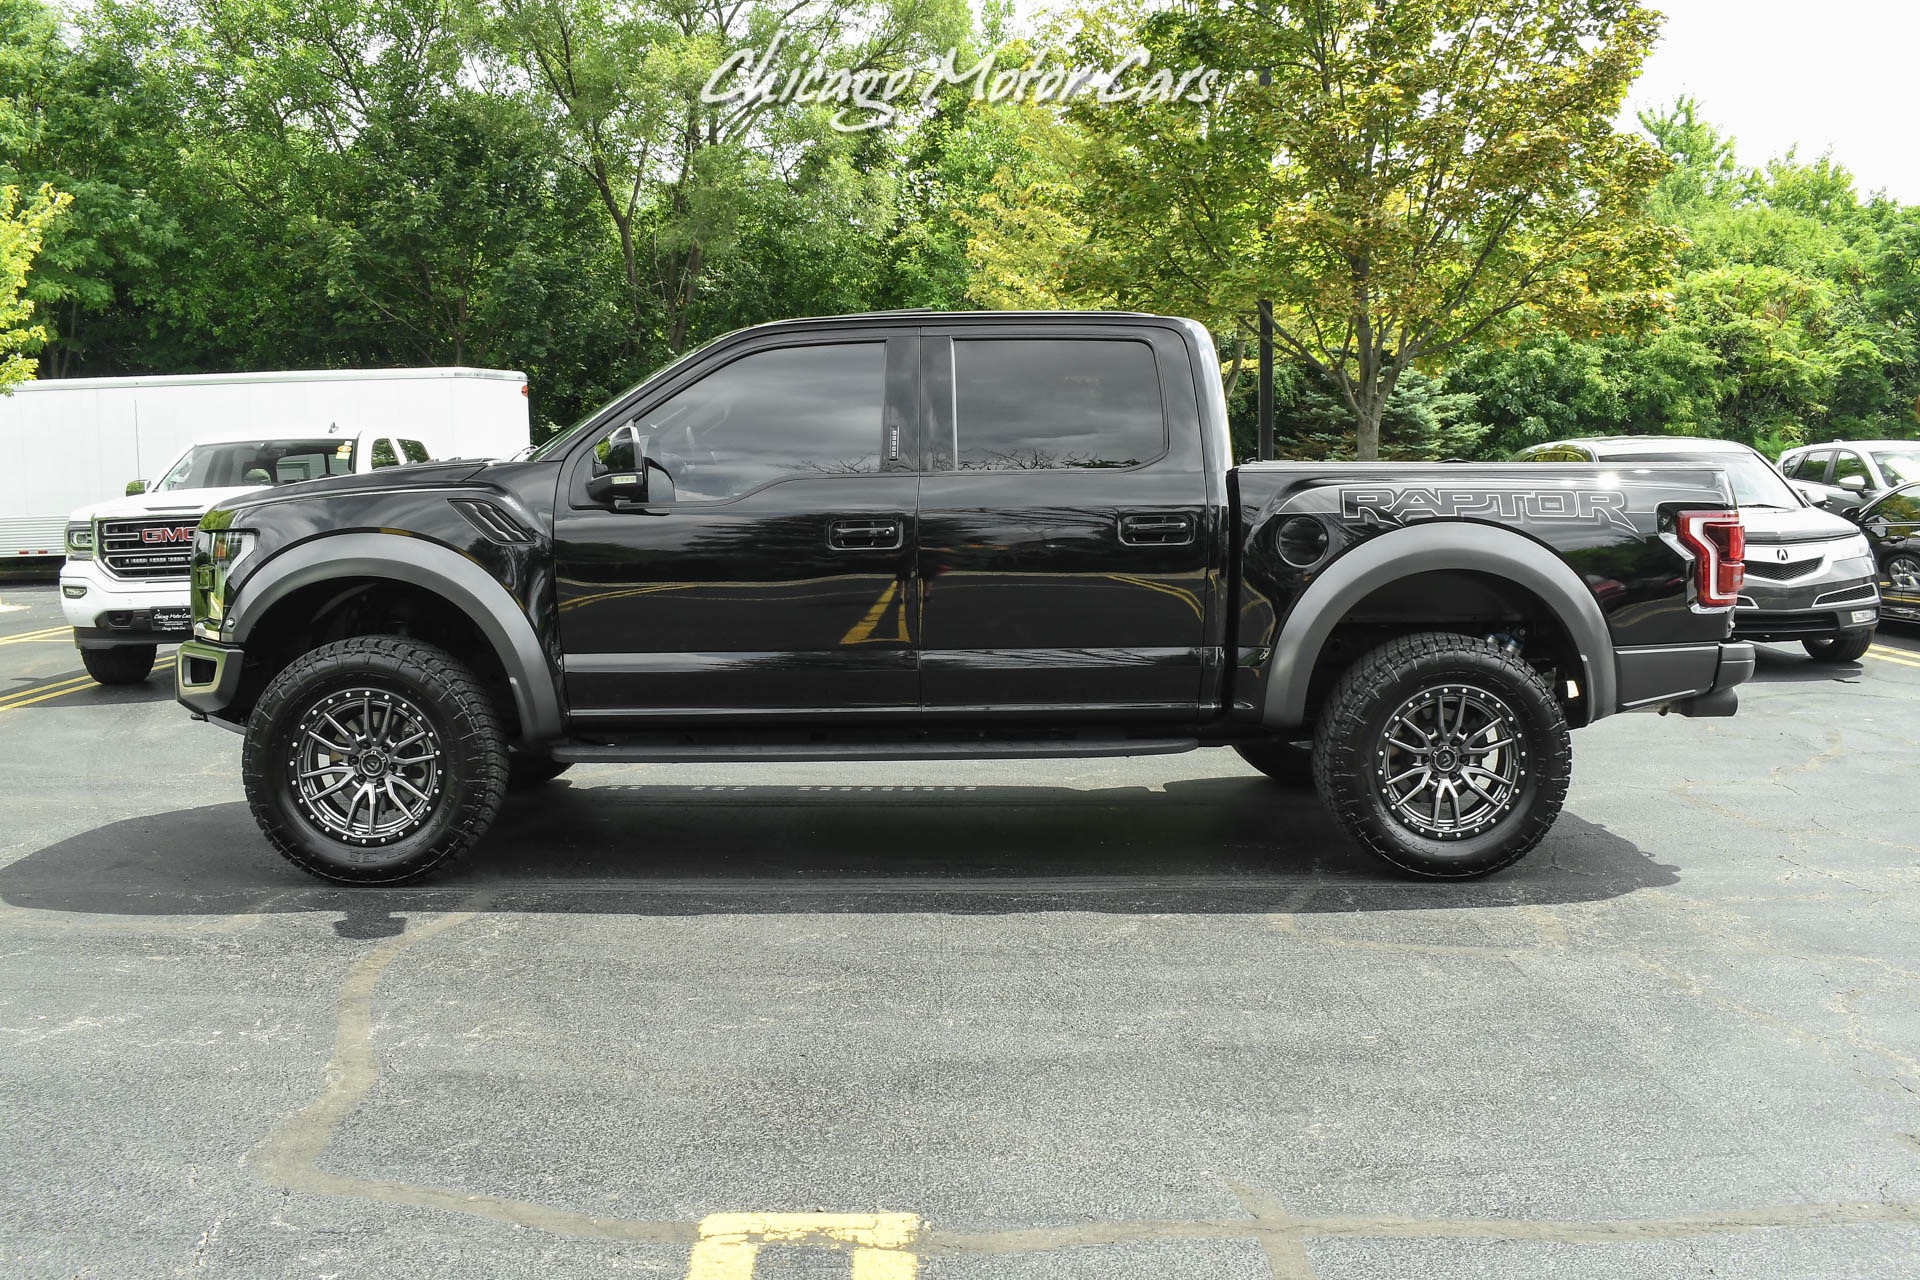 Used-2018-Ford-F-150-Raptor-4x4-4dr-SuperCrew-Equipment-Package-802A-Carbon-Fiber-Package